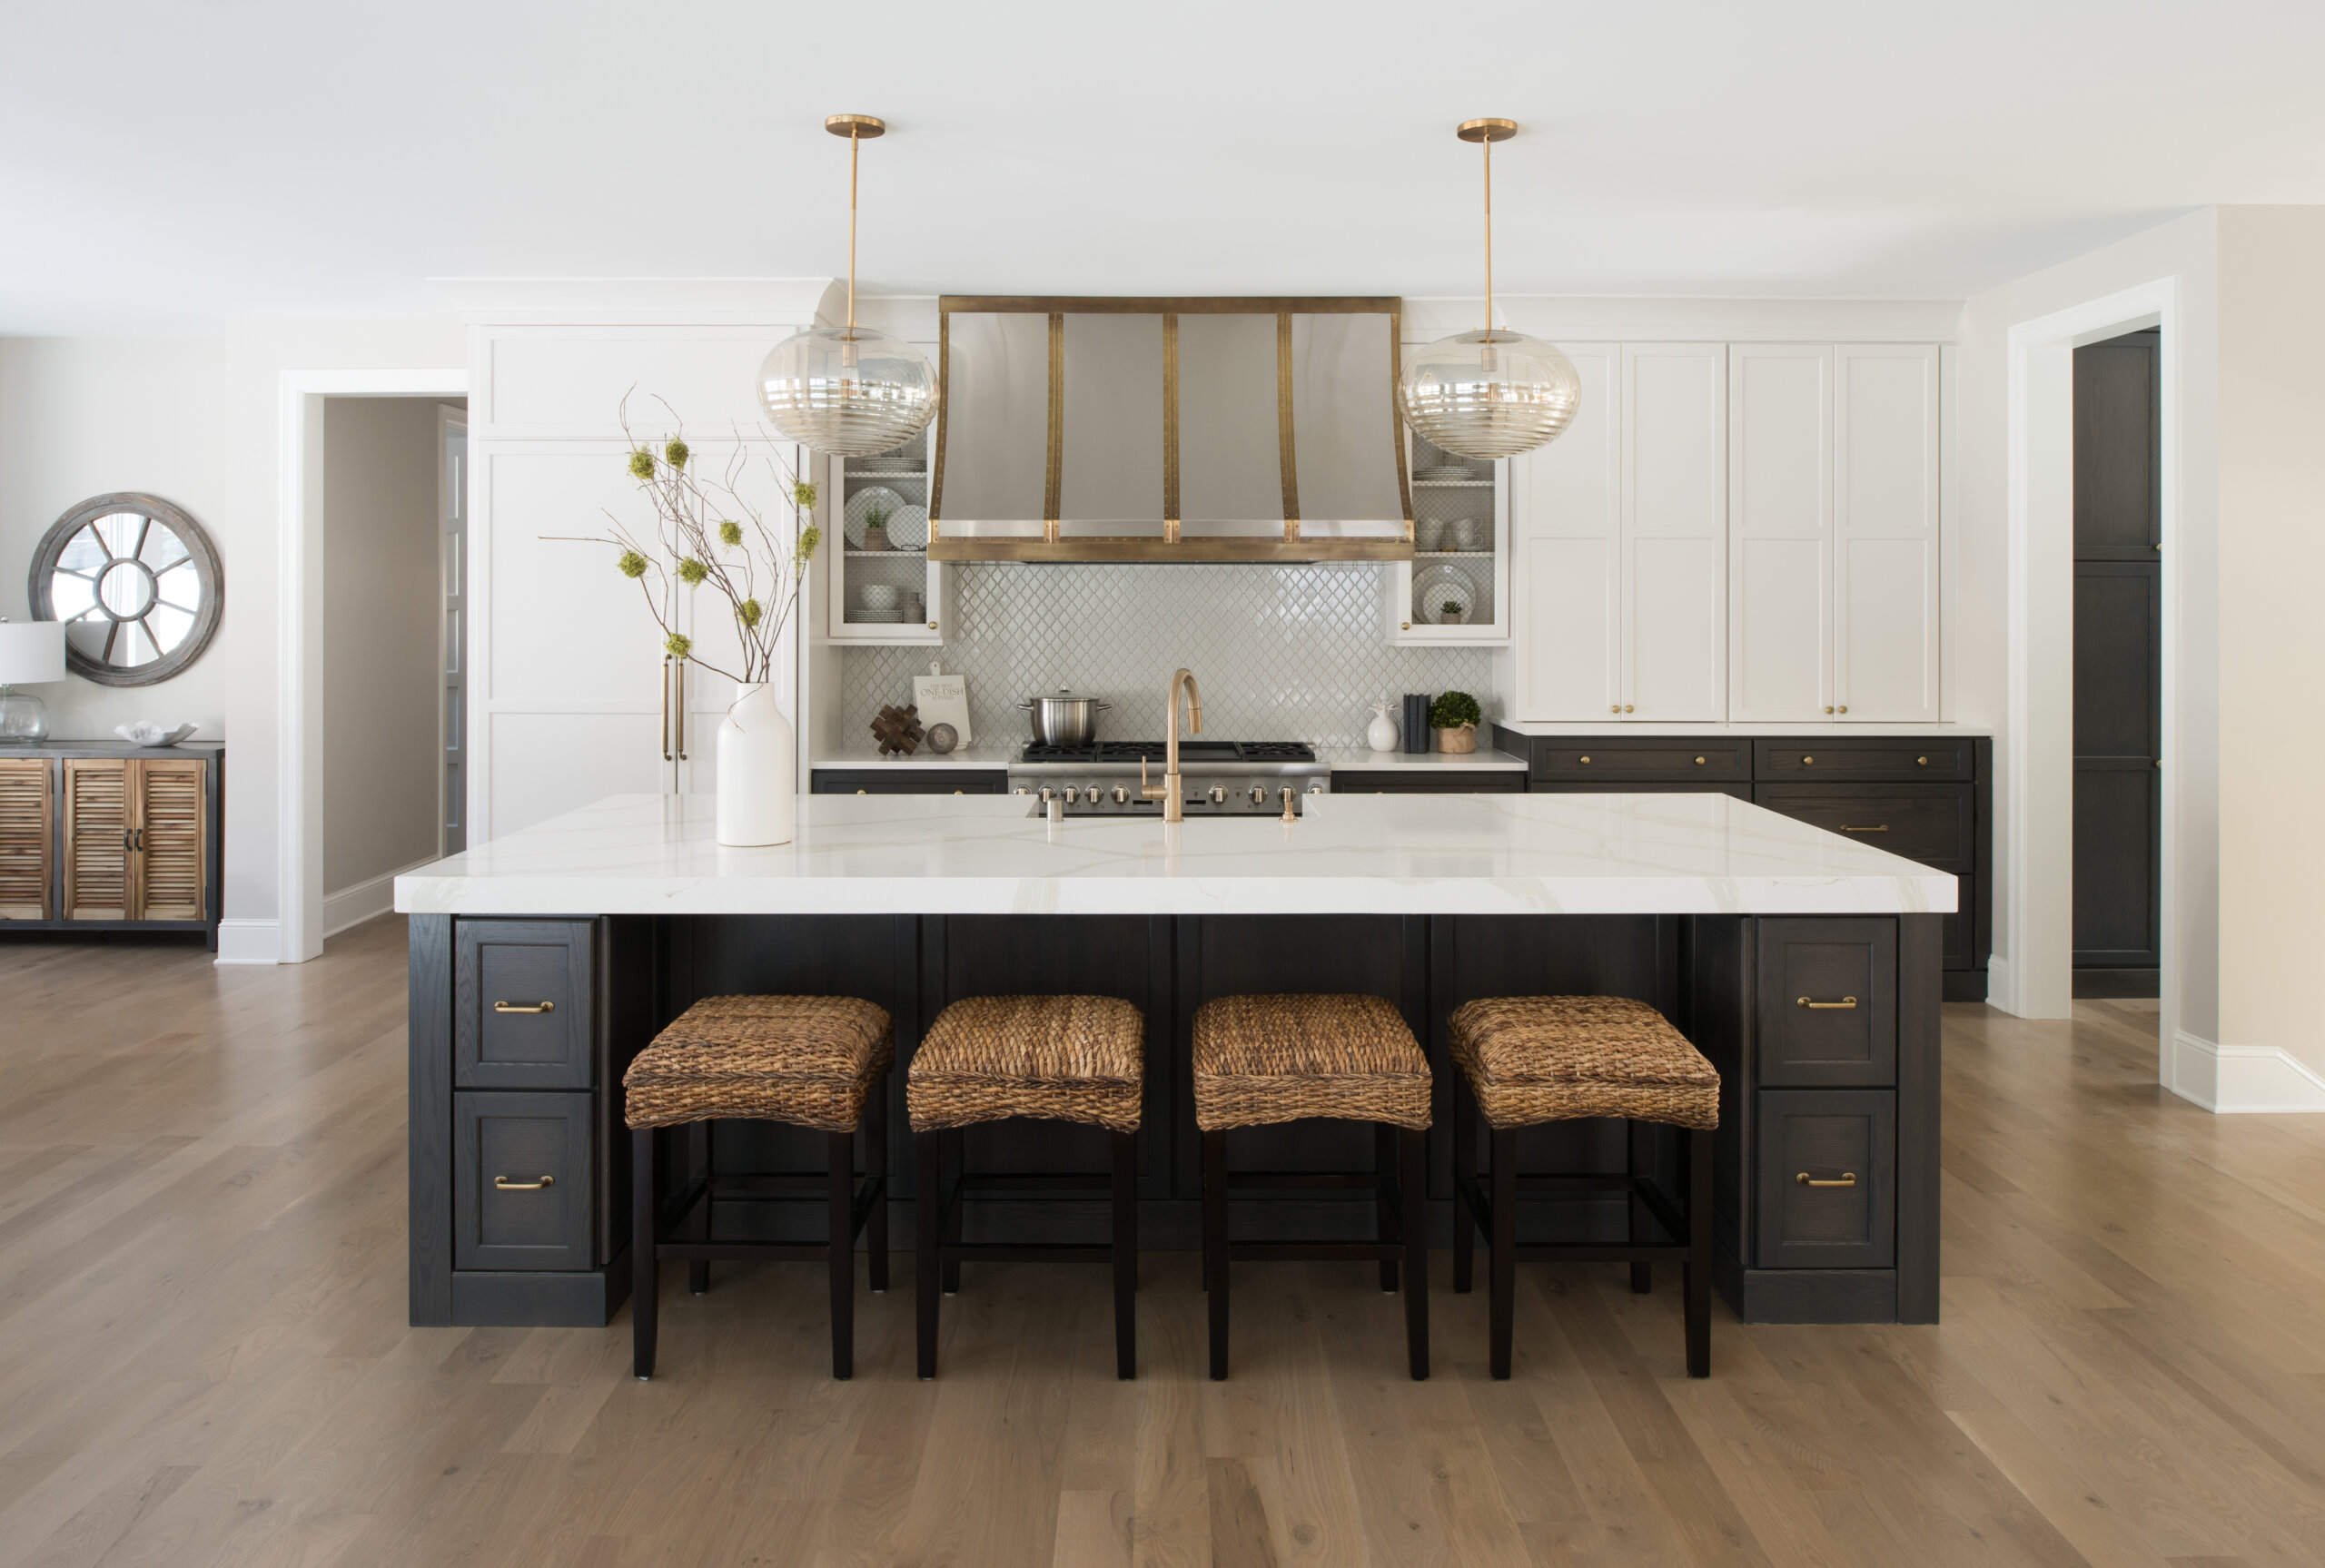 I love my Dura Supreme Cabinetry and new kitchen! What is the best kitchen cabinet? Hear cabinetry reviews and testimonies from homeowners about Dura Supreme Cabinetry. Like this kitchen design story.